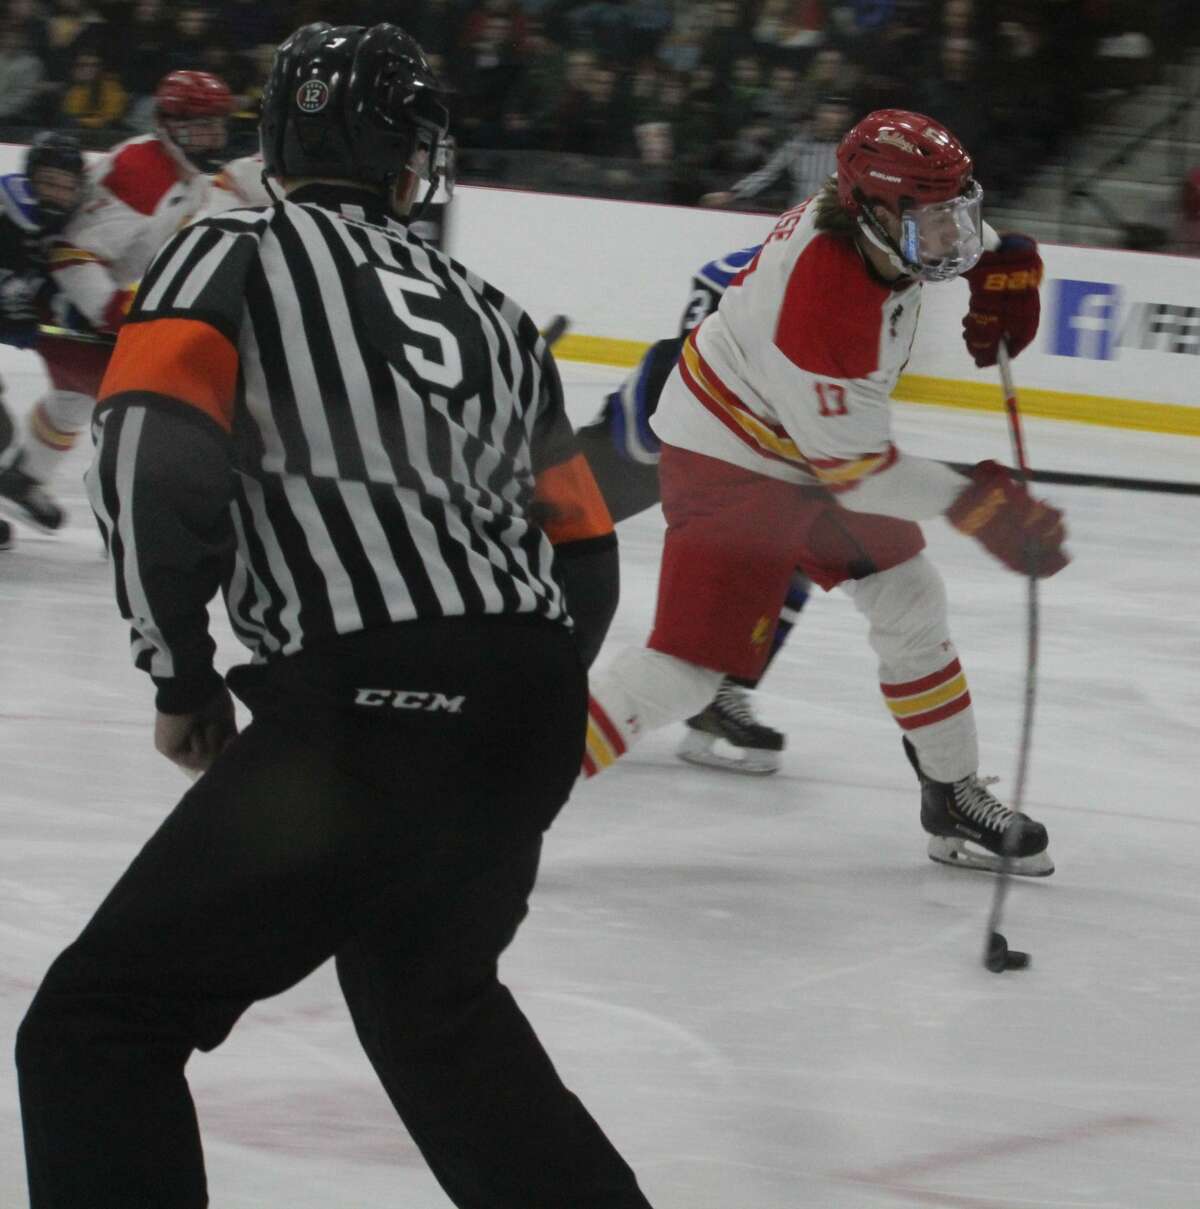 Marshall Moise and his Ferris hockey team will be back in action on Saturday.